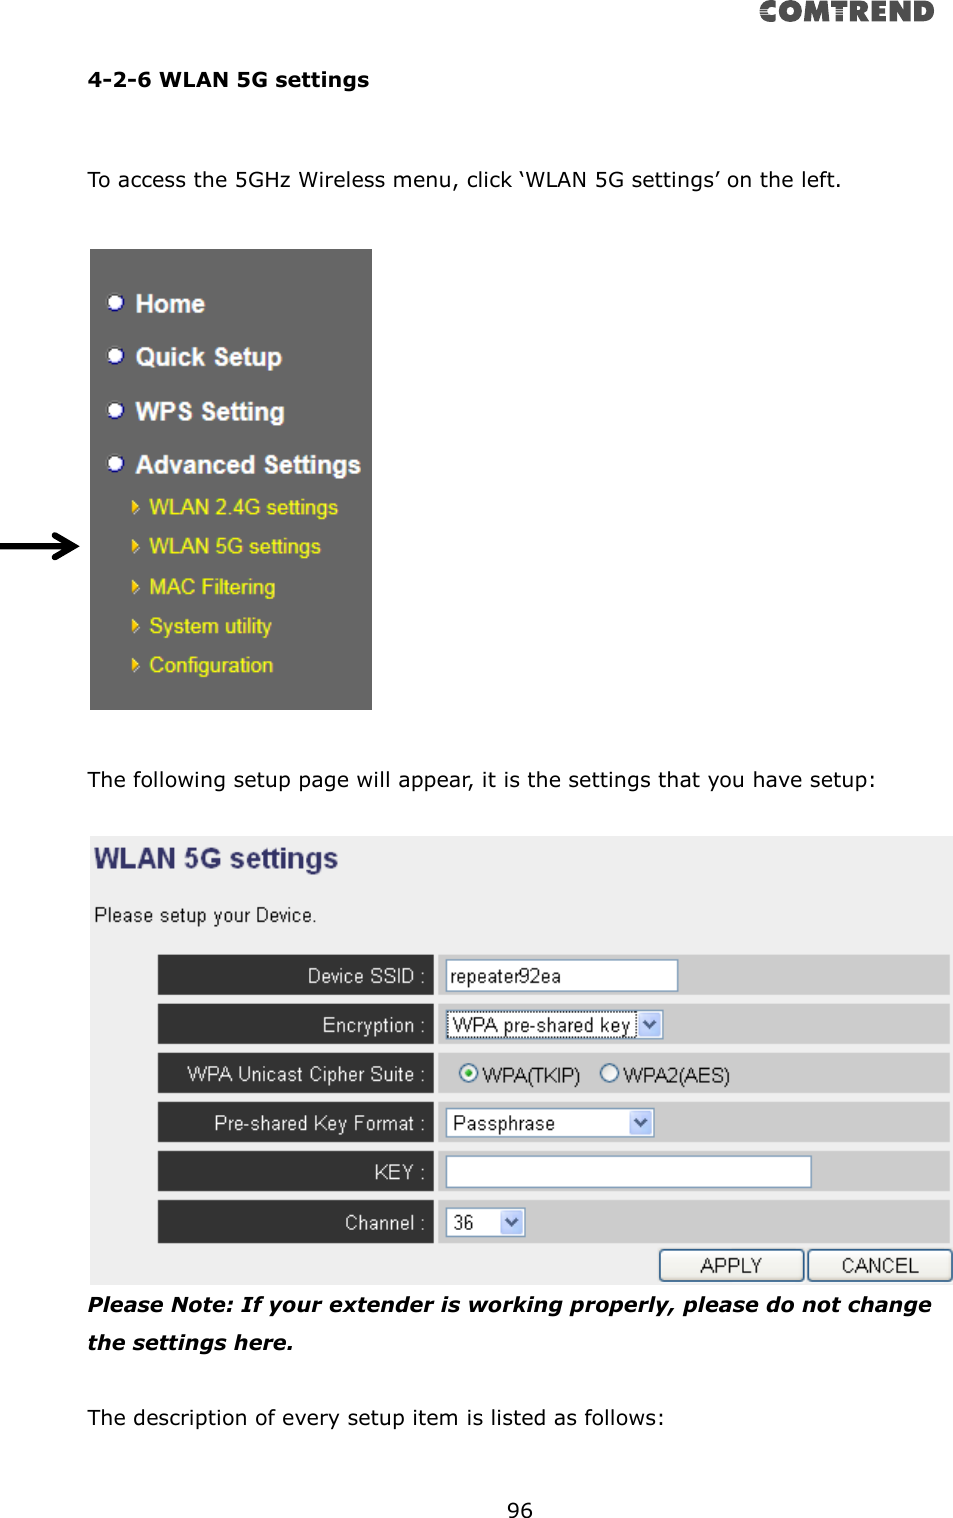       96  4-2-6 WLAN 5G settings  To access the 5GHz Wireless menu, click ‘WLAN 5G settings’ on the left.    The following setup page will appear, it is the settings that you have setup:   Please Note: If your extender is working properly, please do not change the settings here.  The description of every setup item is listed as follows:  